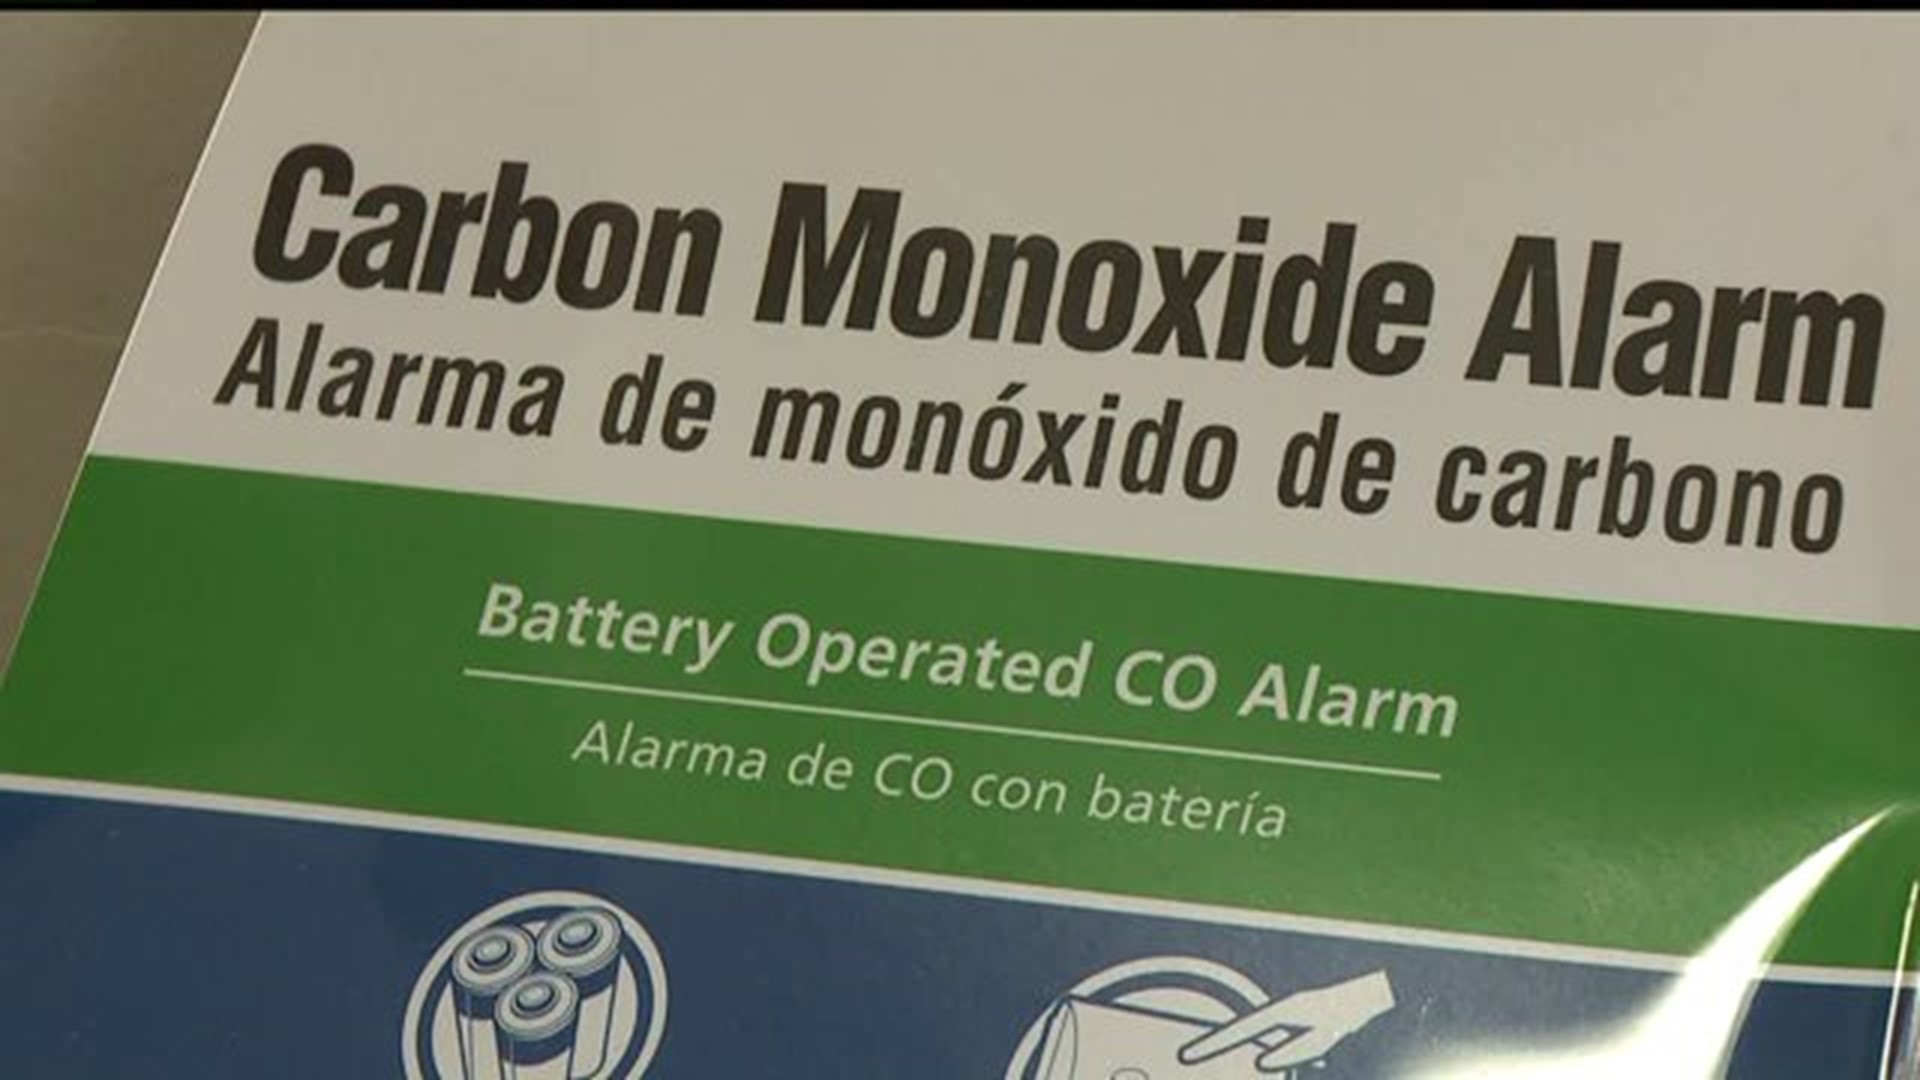 Carbon monoxide detectors may soon be required